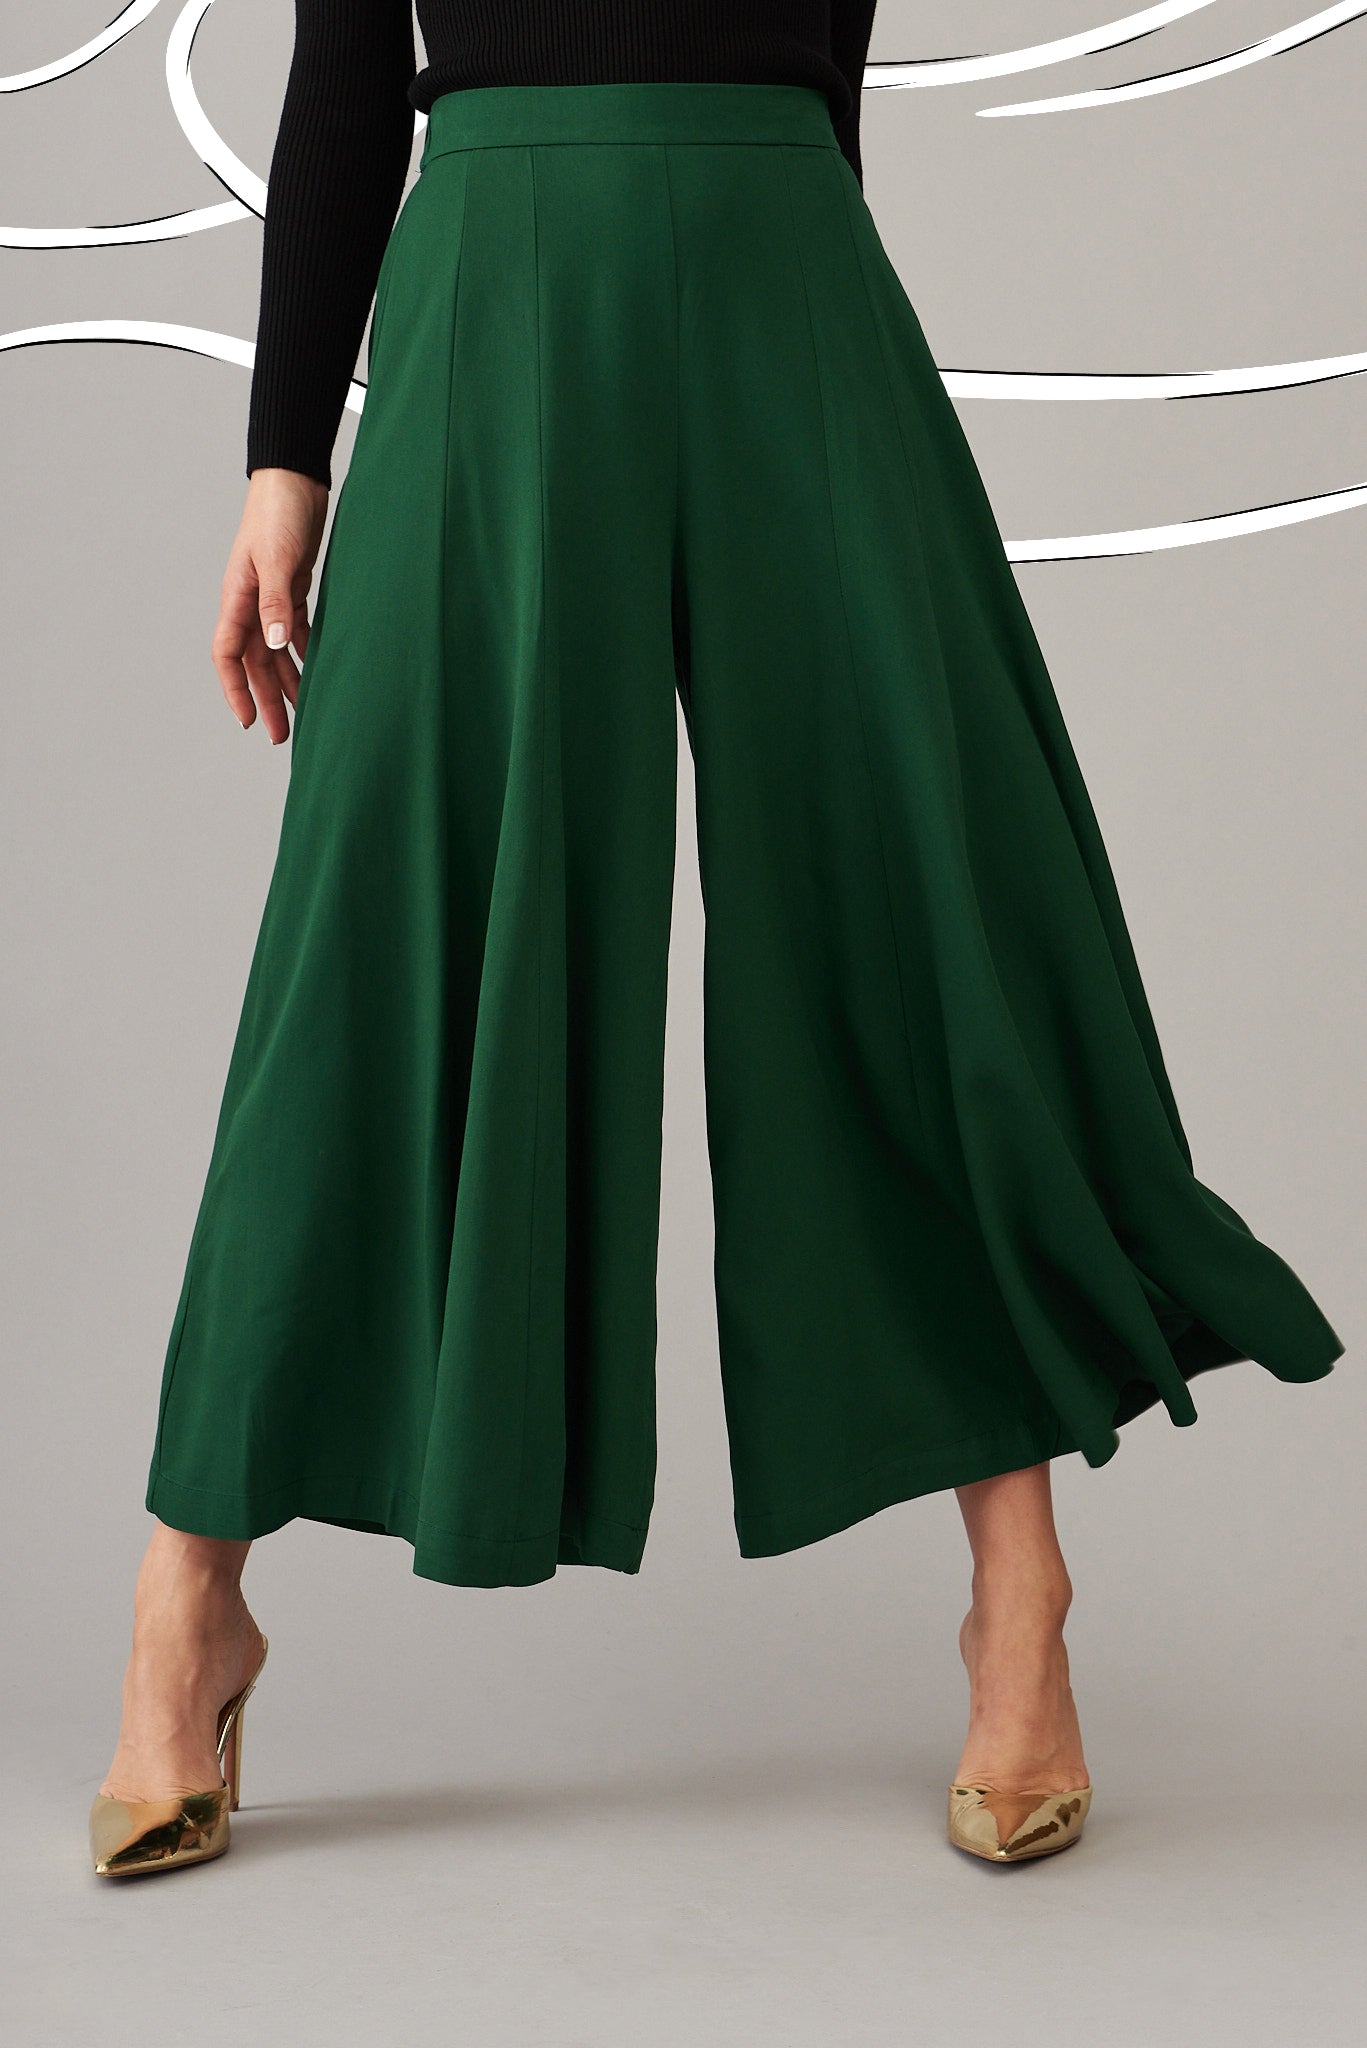 Sugary Pants In Emerald – St Frock